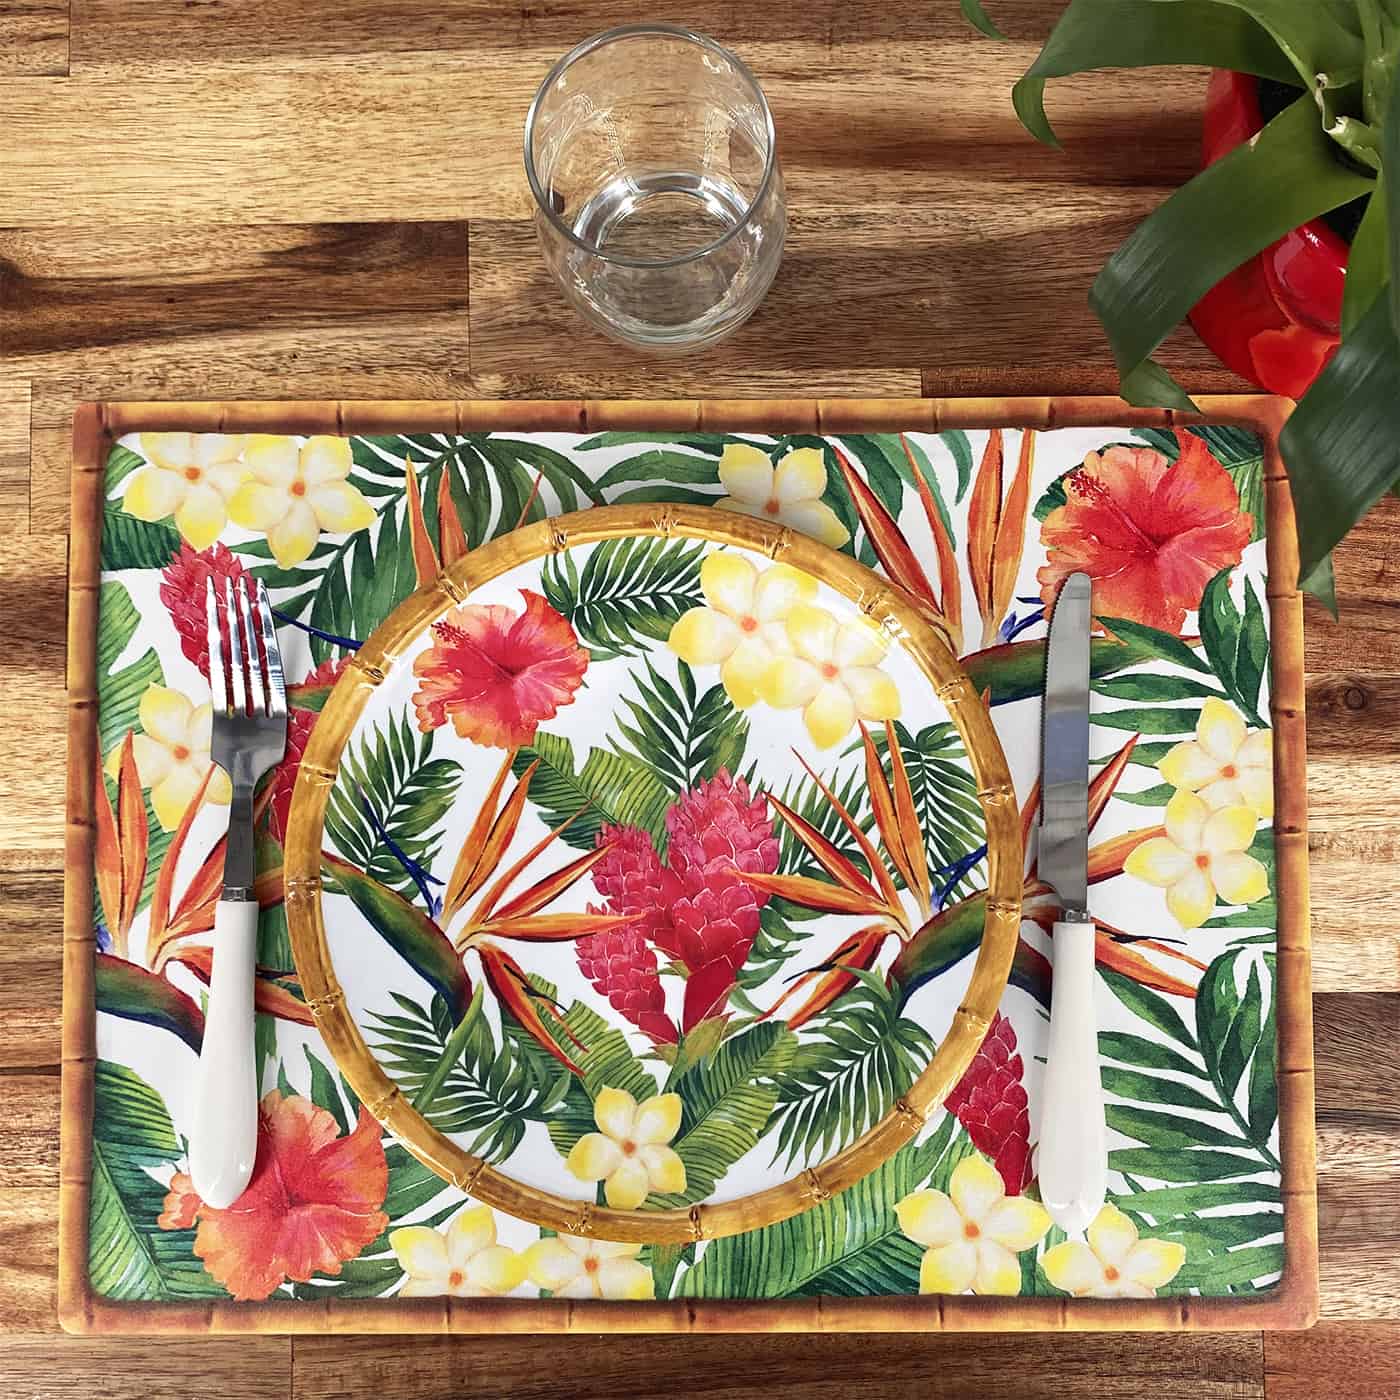 Placemat (40 x 30 cm) set of 6 - Exotic Flowers theme